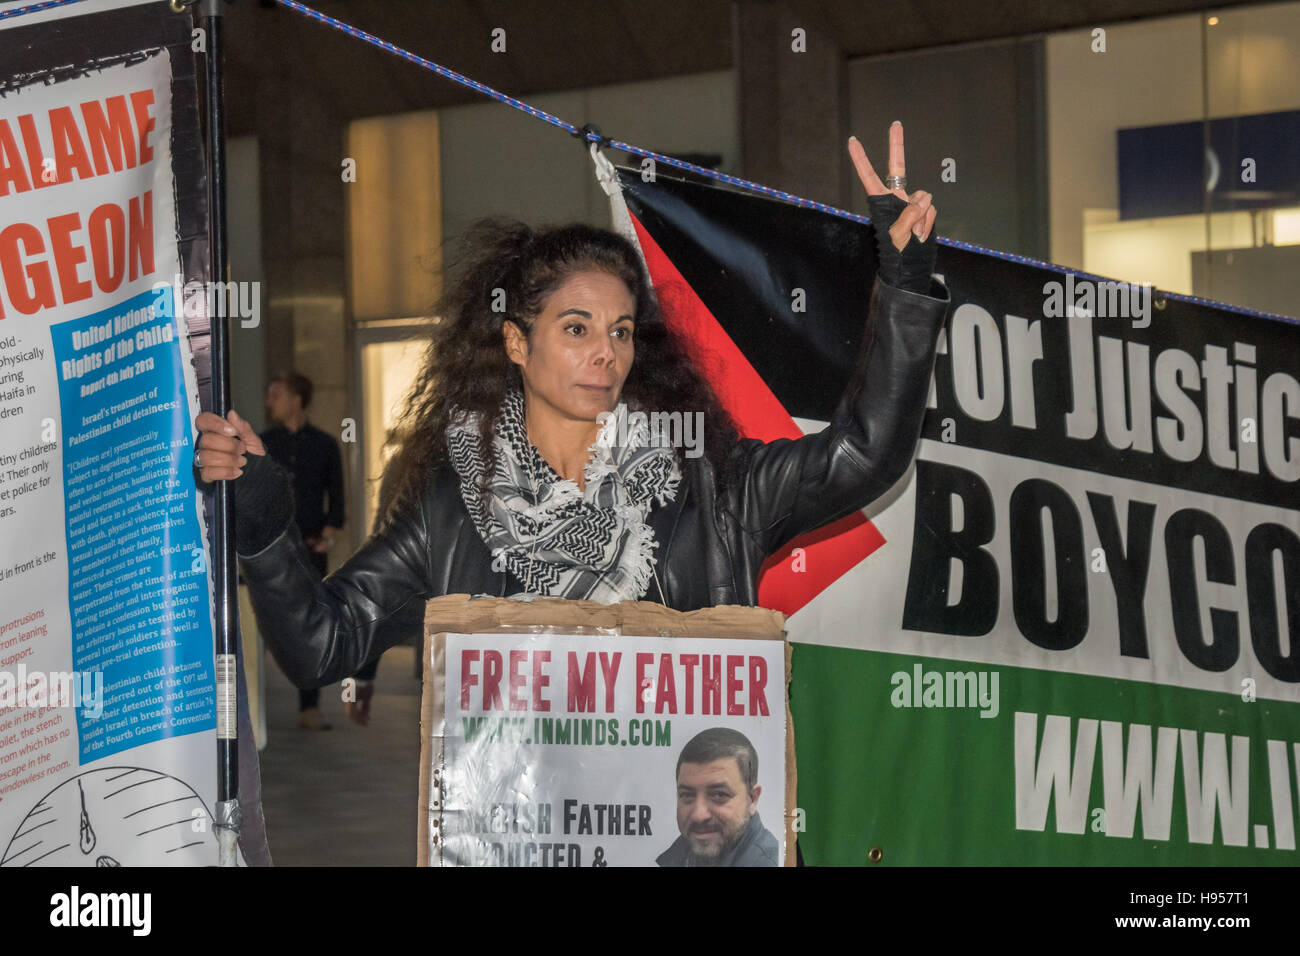 London, UK. 18th November 2016. Human rights group Inminds protested outside the headquarters of British security company G4S over the abduction by Israel and subsequent torture of British national and father of five Fayez Sharary. Arrested by Israeli forces  on 15 September when leaving the West Bank for Jordan with his wife and youngest child to fly home after a family visit he was tortured for 3 weeks by Israeli secret police to force a confession An Israeli judge declared this worthless and inadmissible and ordered his release but he is still held in the Ofer prison secured by G4S. Fayez's Stock Photo